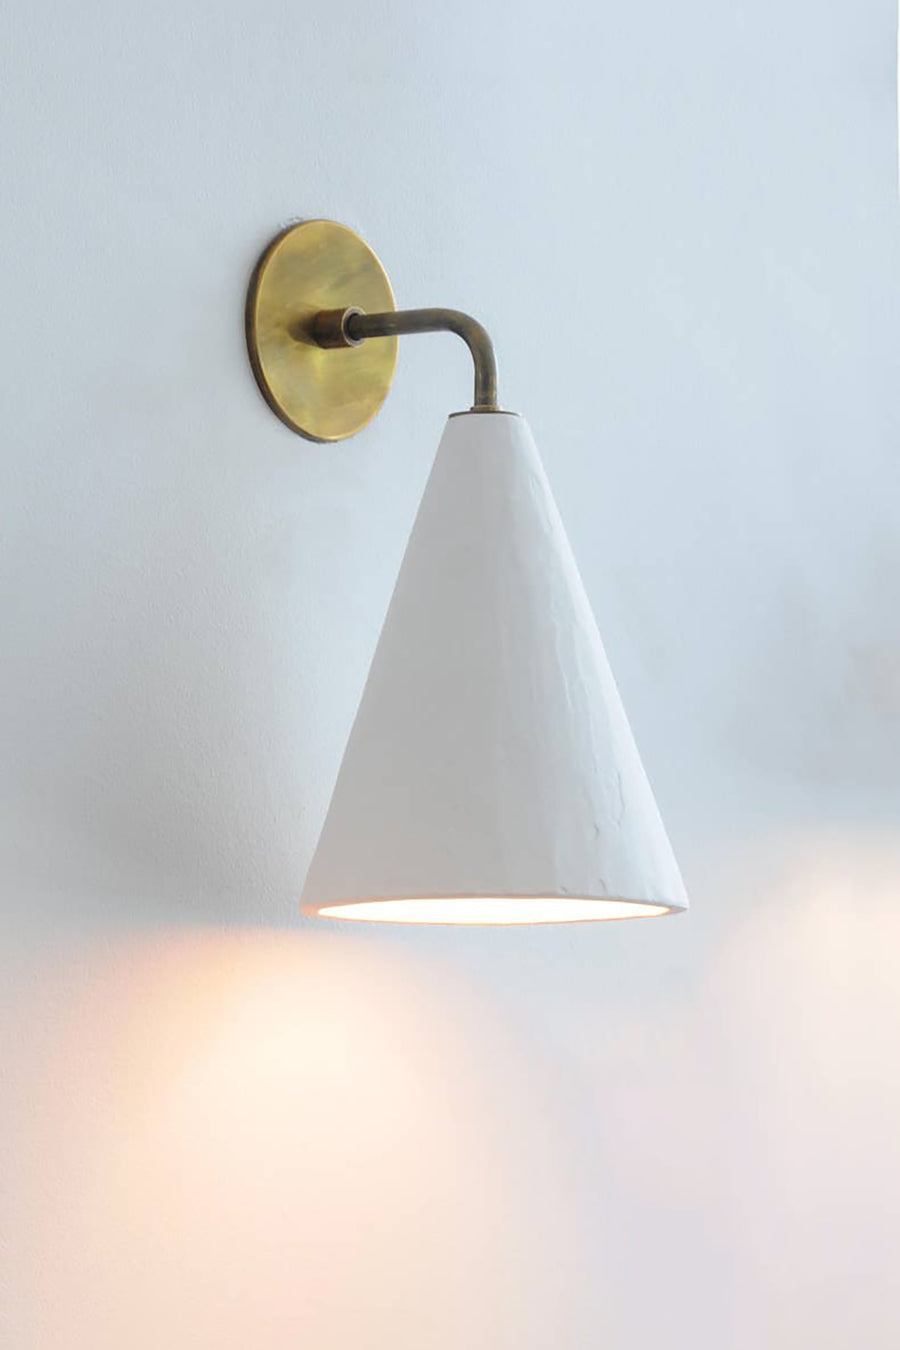 Rose Uniacke Plaster Cone Wall Light Large